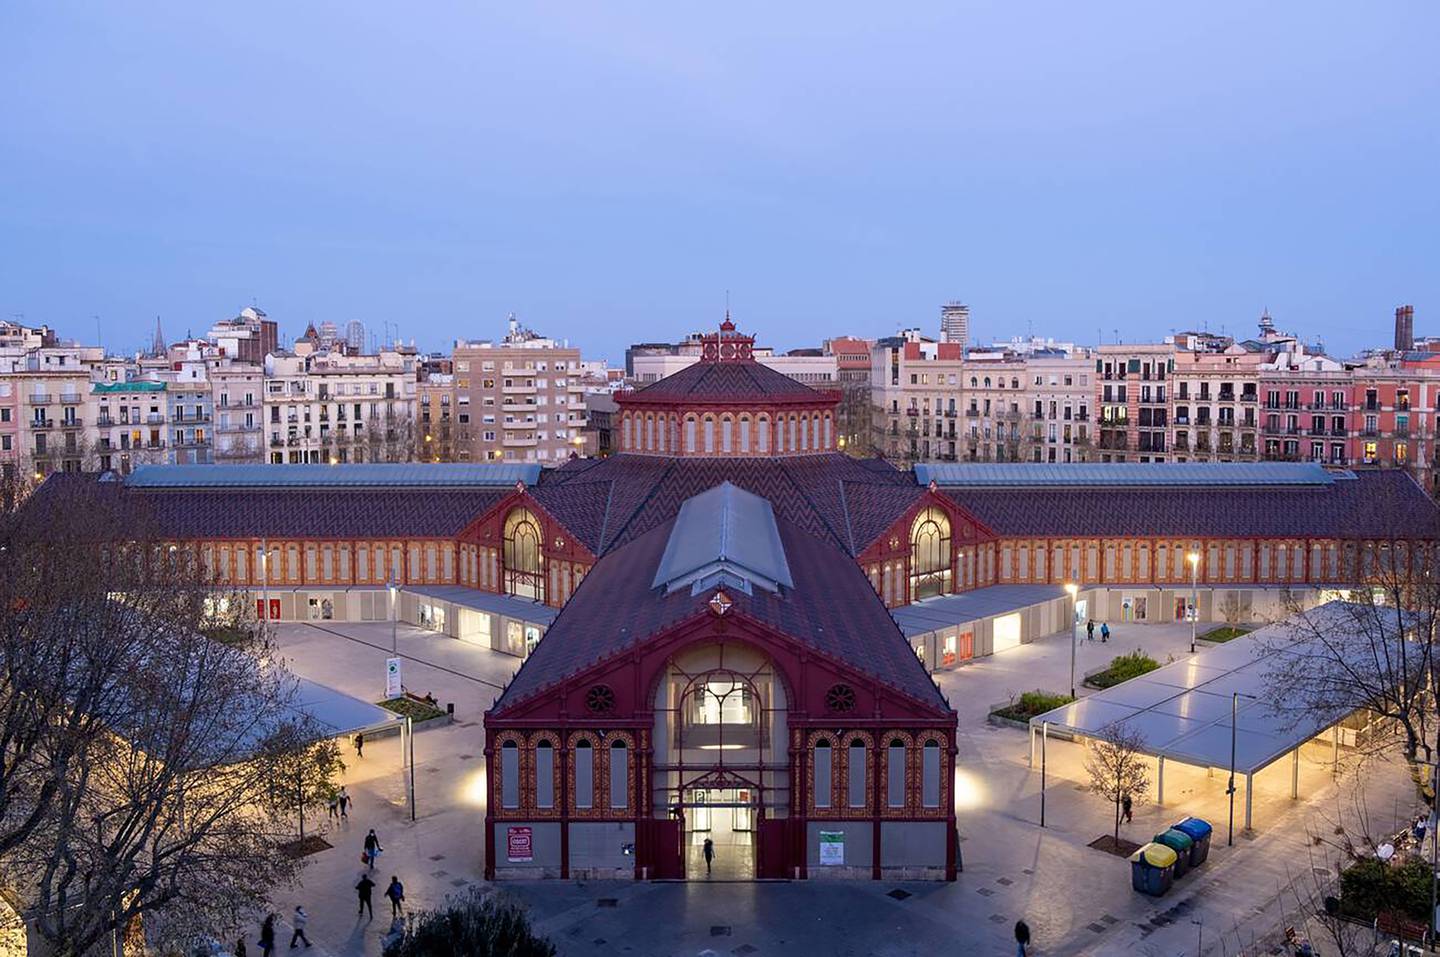 Mercat de Sant Antoni or Sant Antoni Market is a 135-year-old marketplace in a Neoclassical-style building. Photo: Alamy